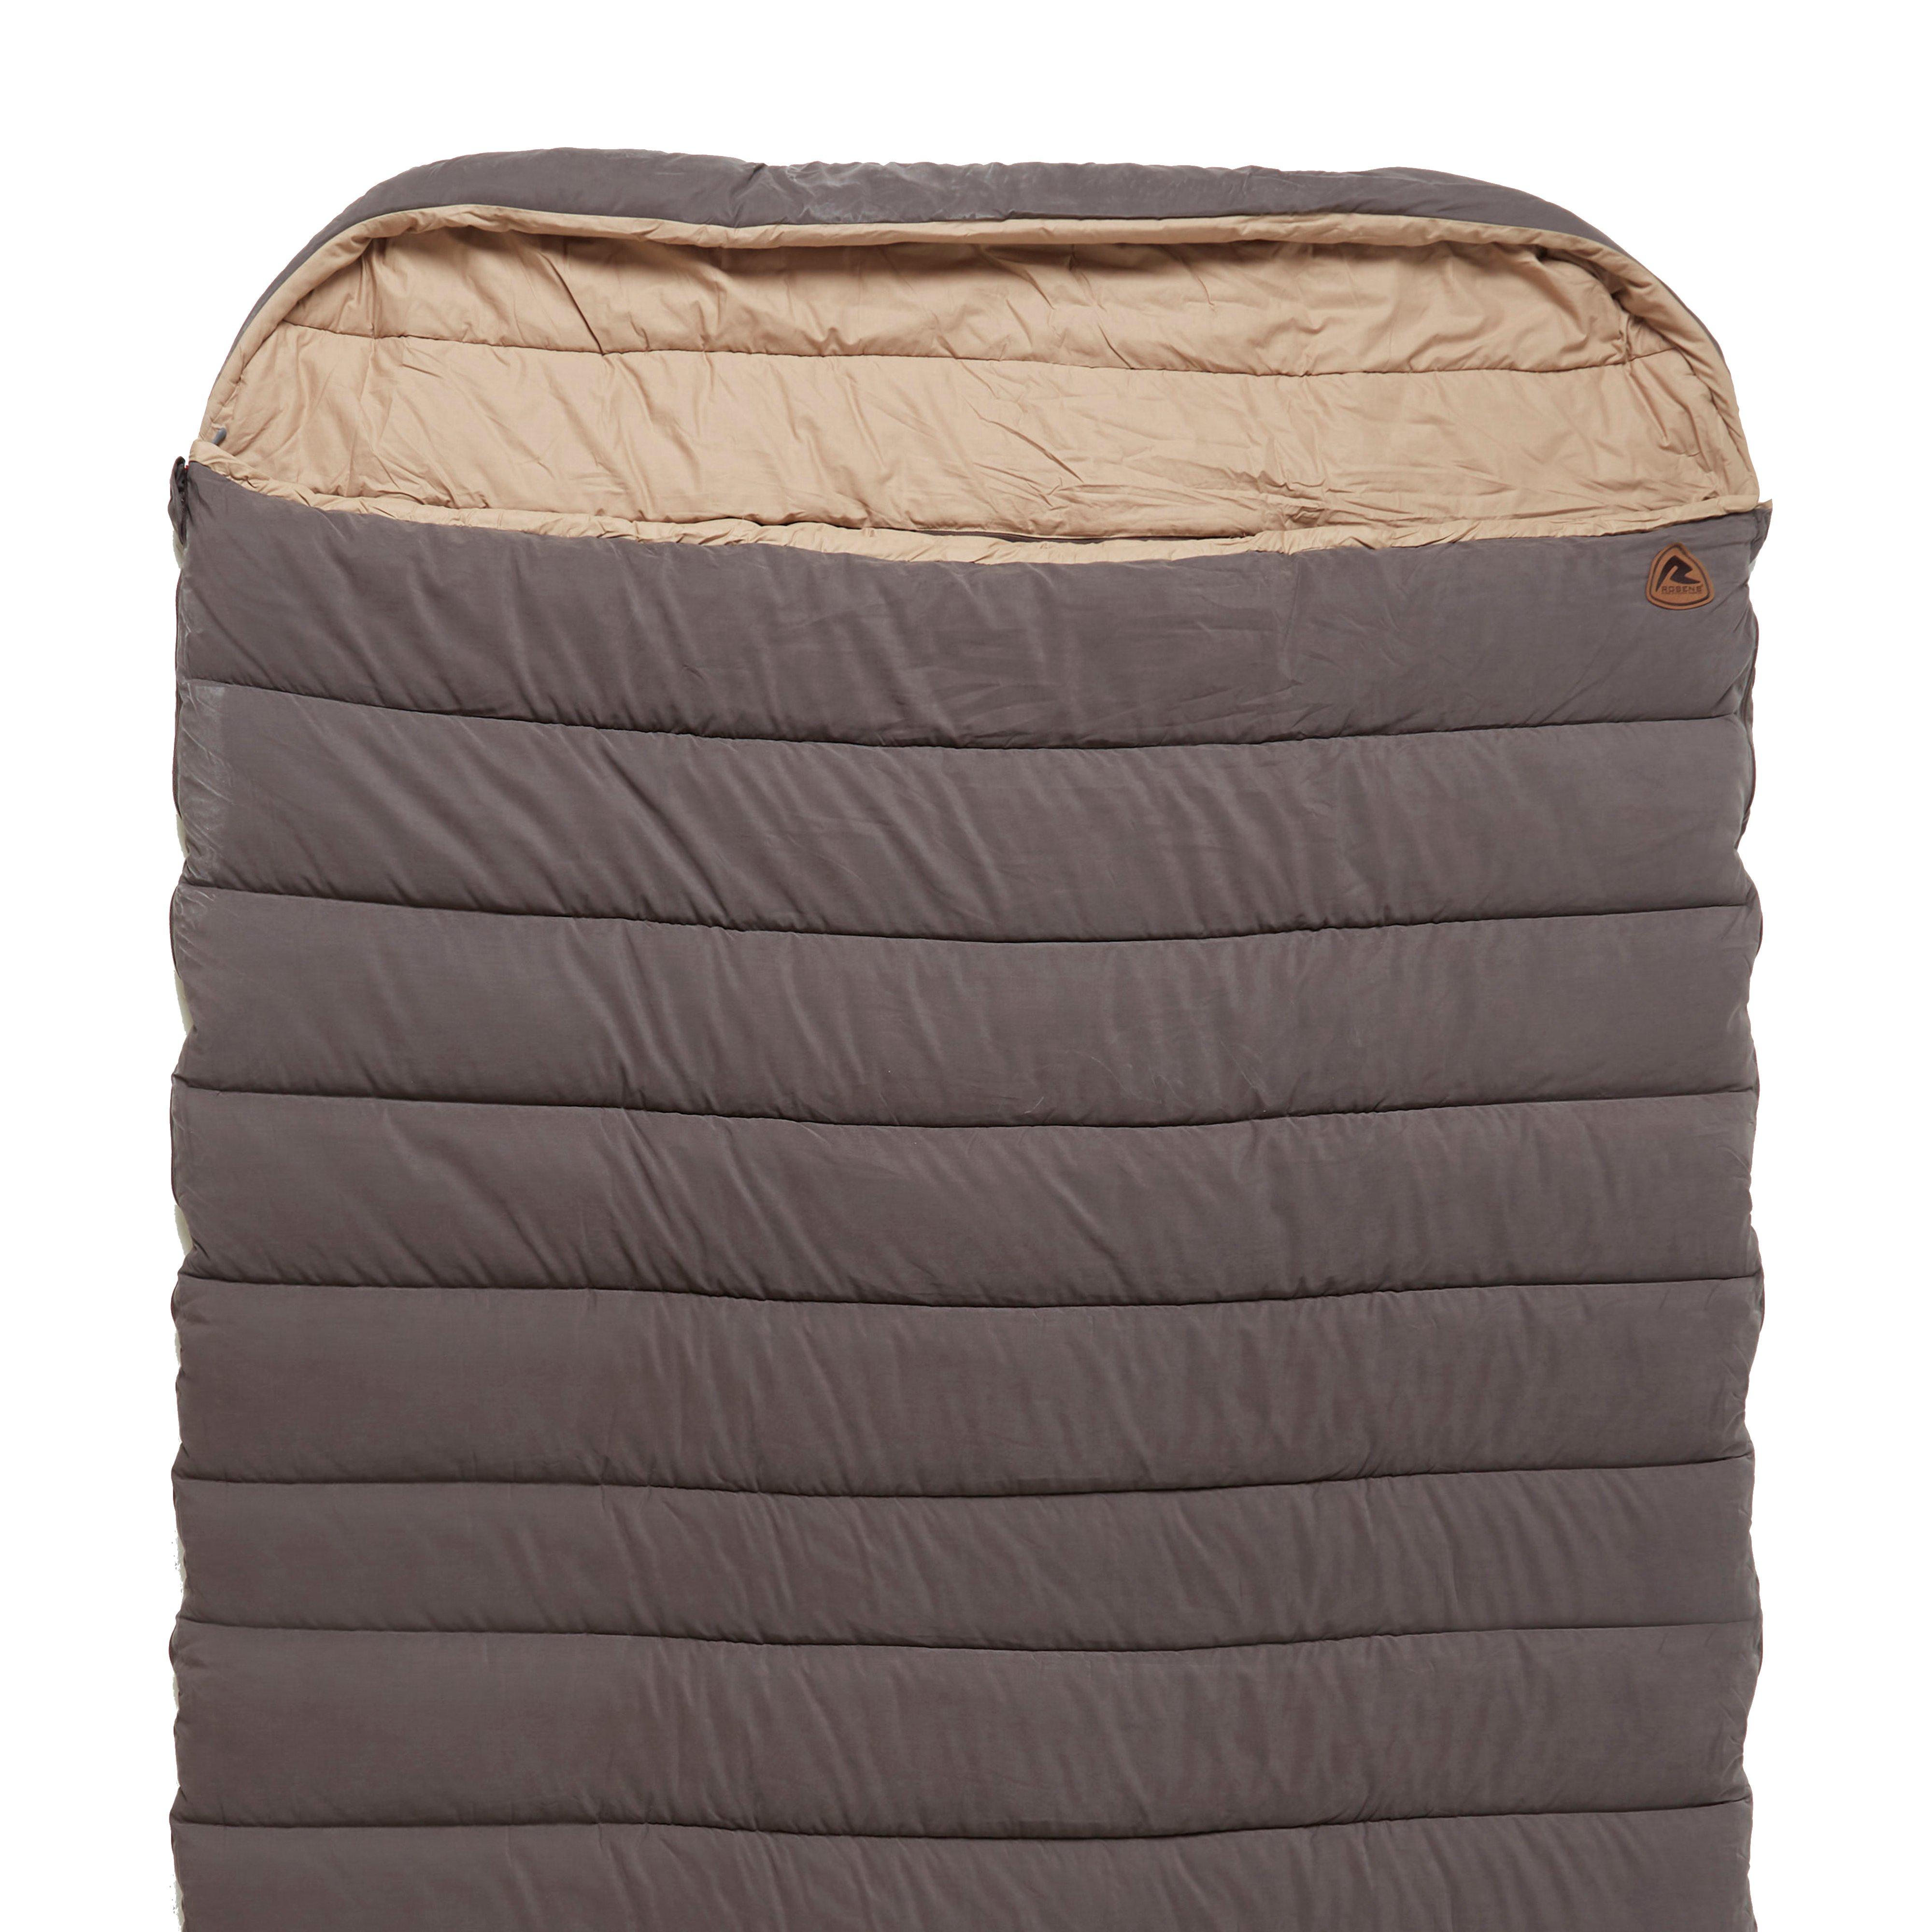 Robens The Coulee II Twin Sleeping Bag Review